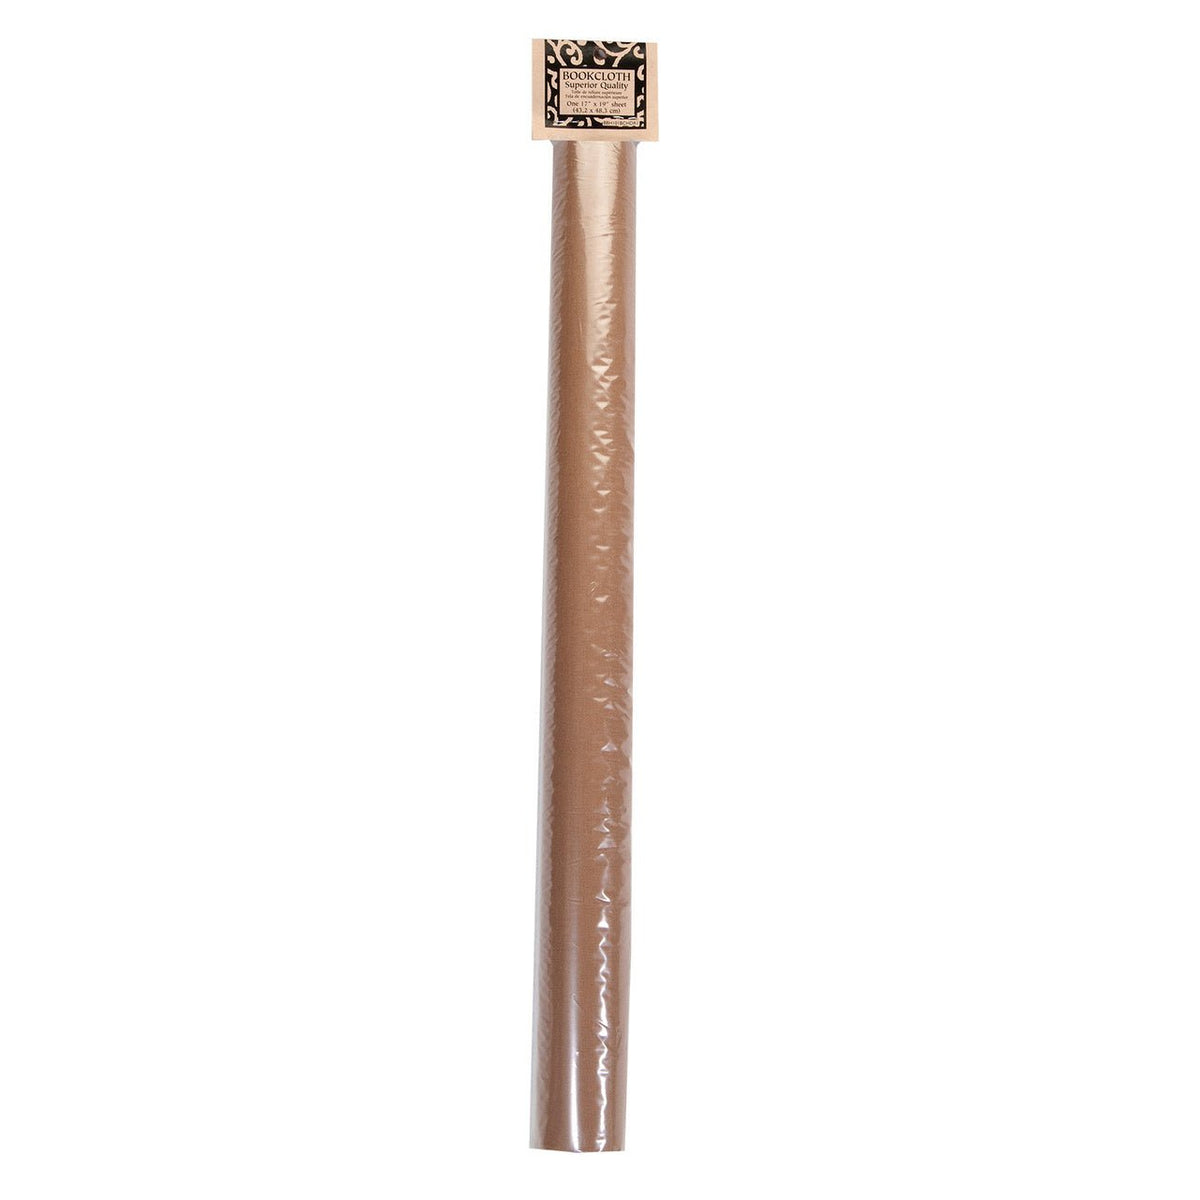 Lineco/university Products - Book by Hand Bookcloth Roll - Light Brown